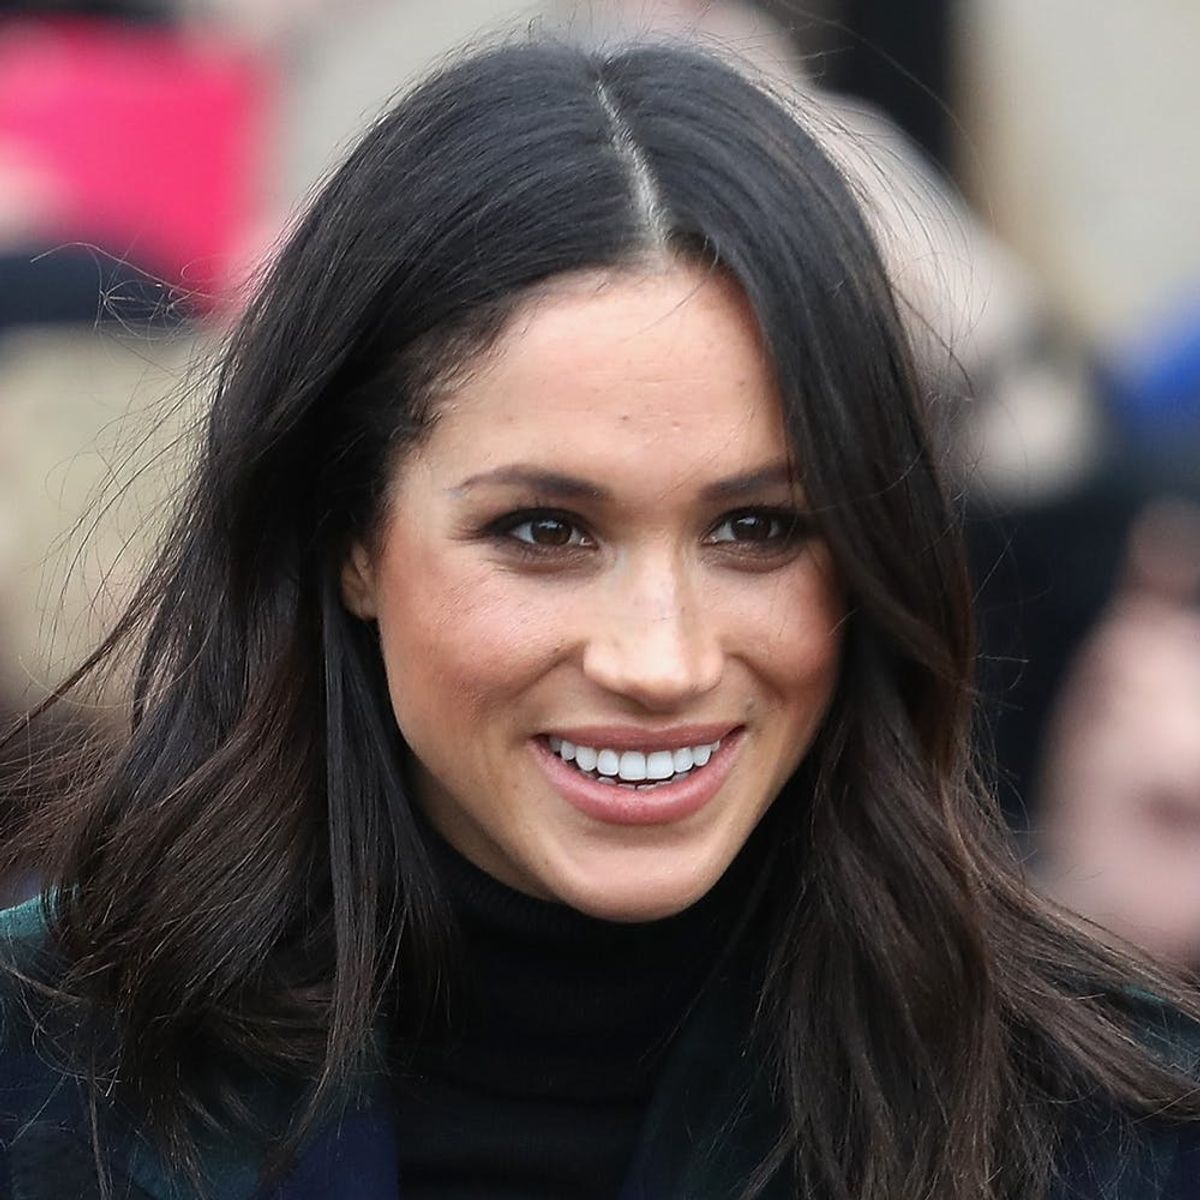 The One Accessory Meghan Markle Will Always Be Expected to Wear As a Royal